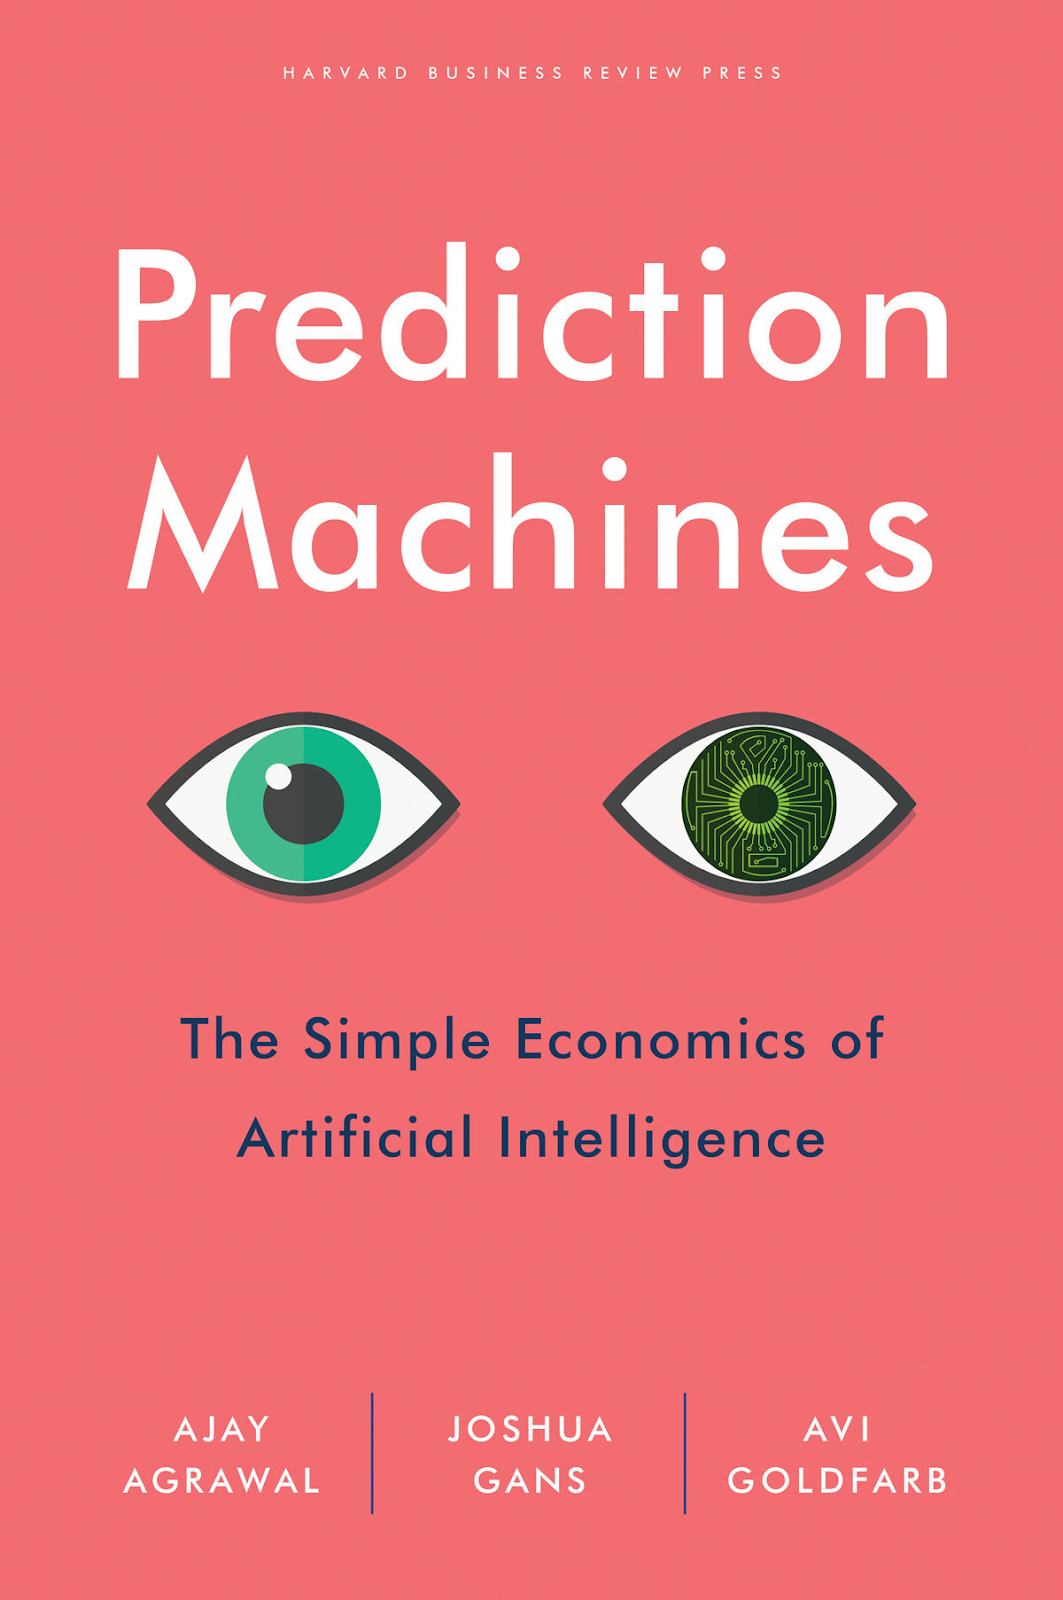 Book cover: Prediction Machines: The Simple Economics of Artificial Intelligence by Ajay Agrawal, Joshua Gans and Avi Goldfarb